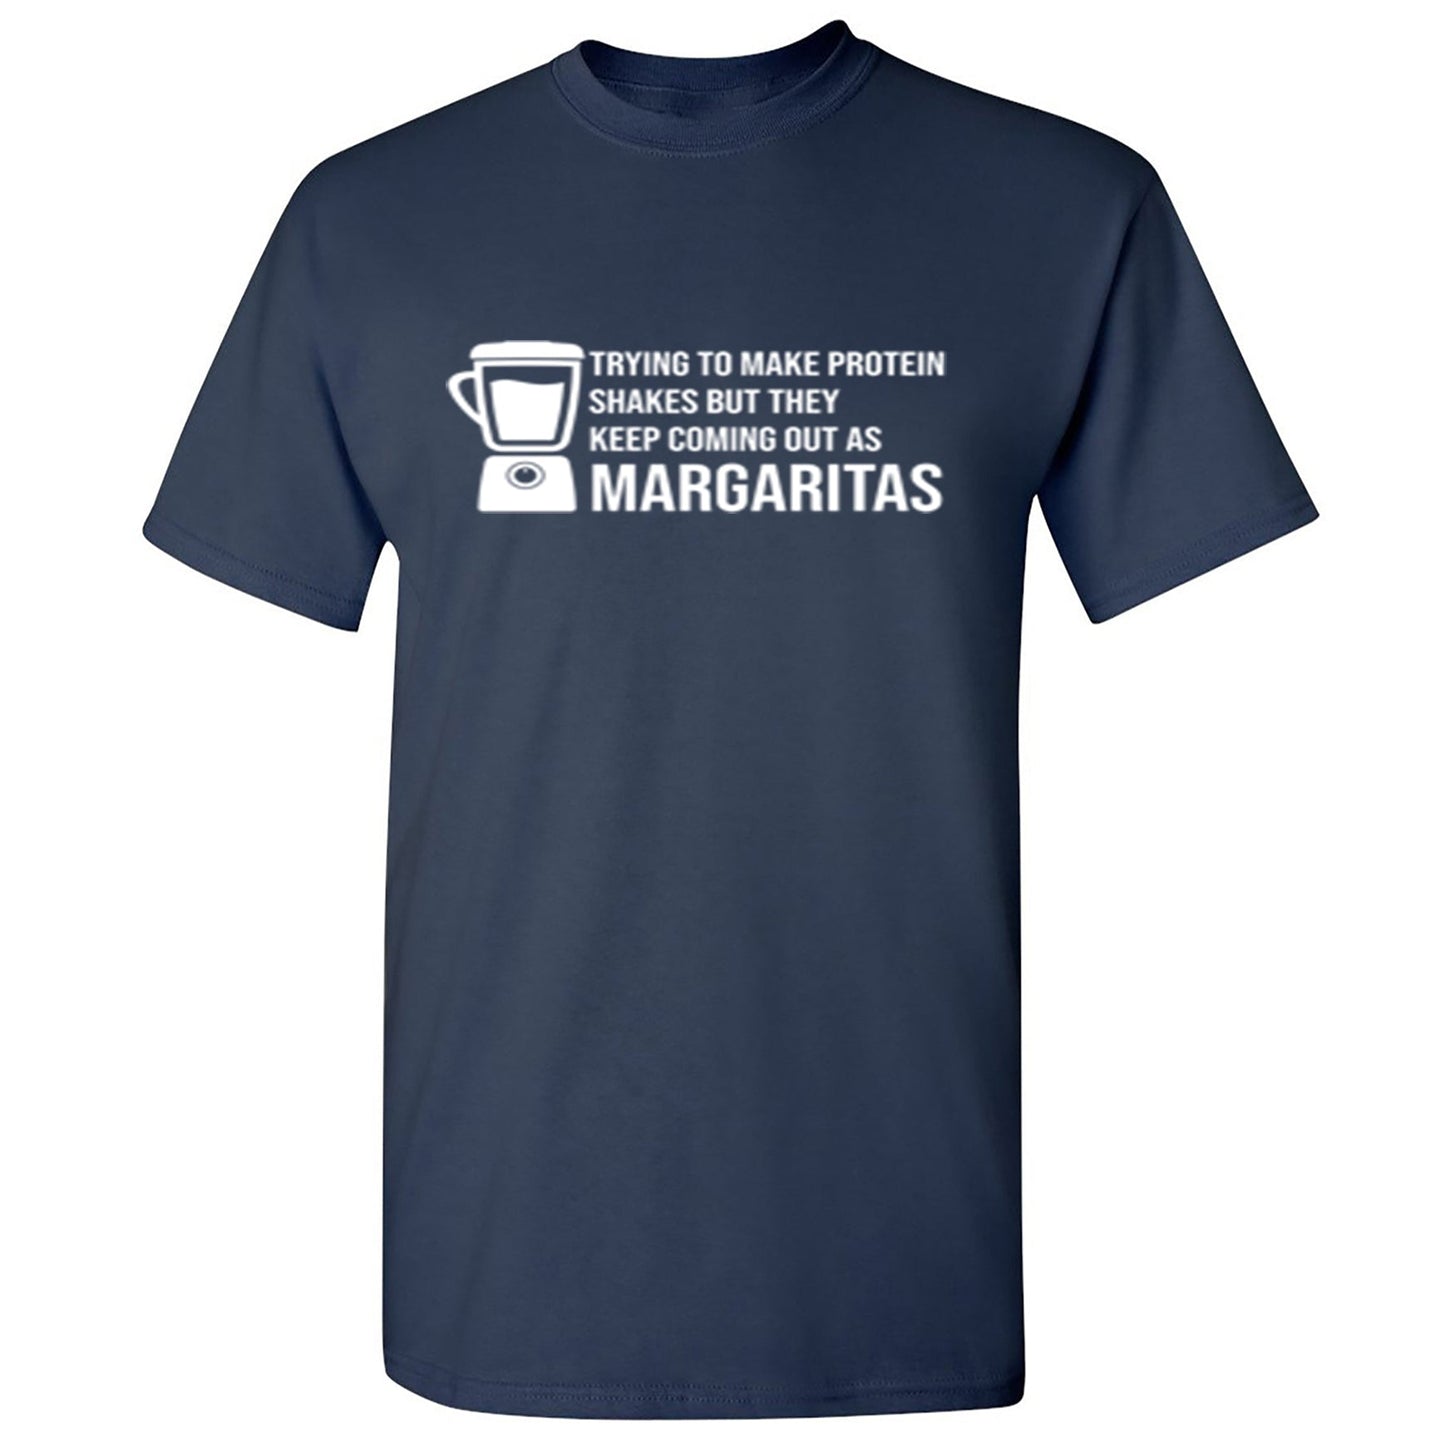 Tring To Make Protein Shakes but They Keep Coming Out As Margaritas - Funny T Shirts & Graphic Tees